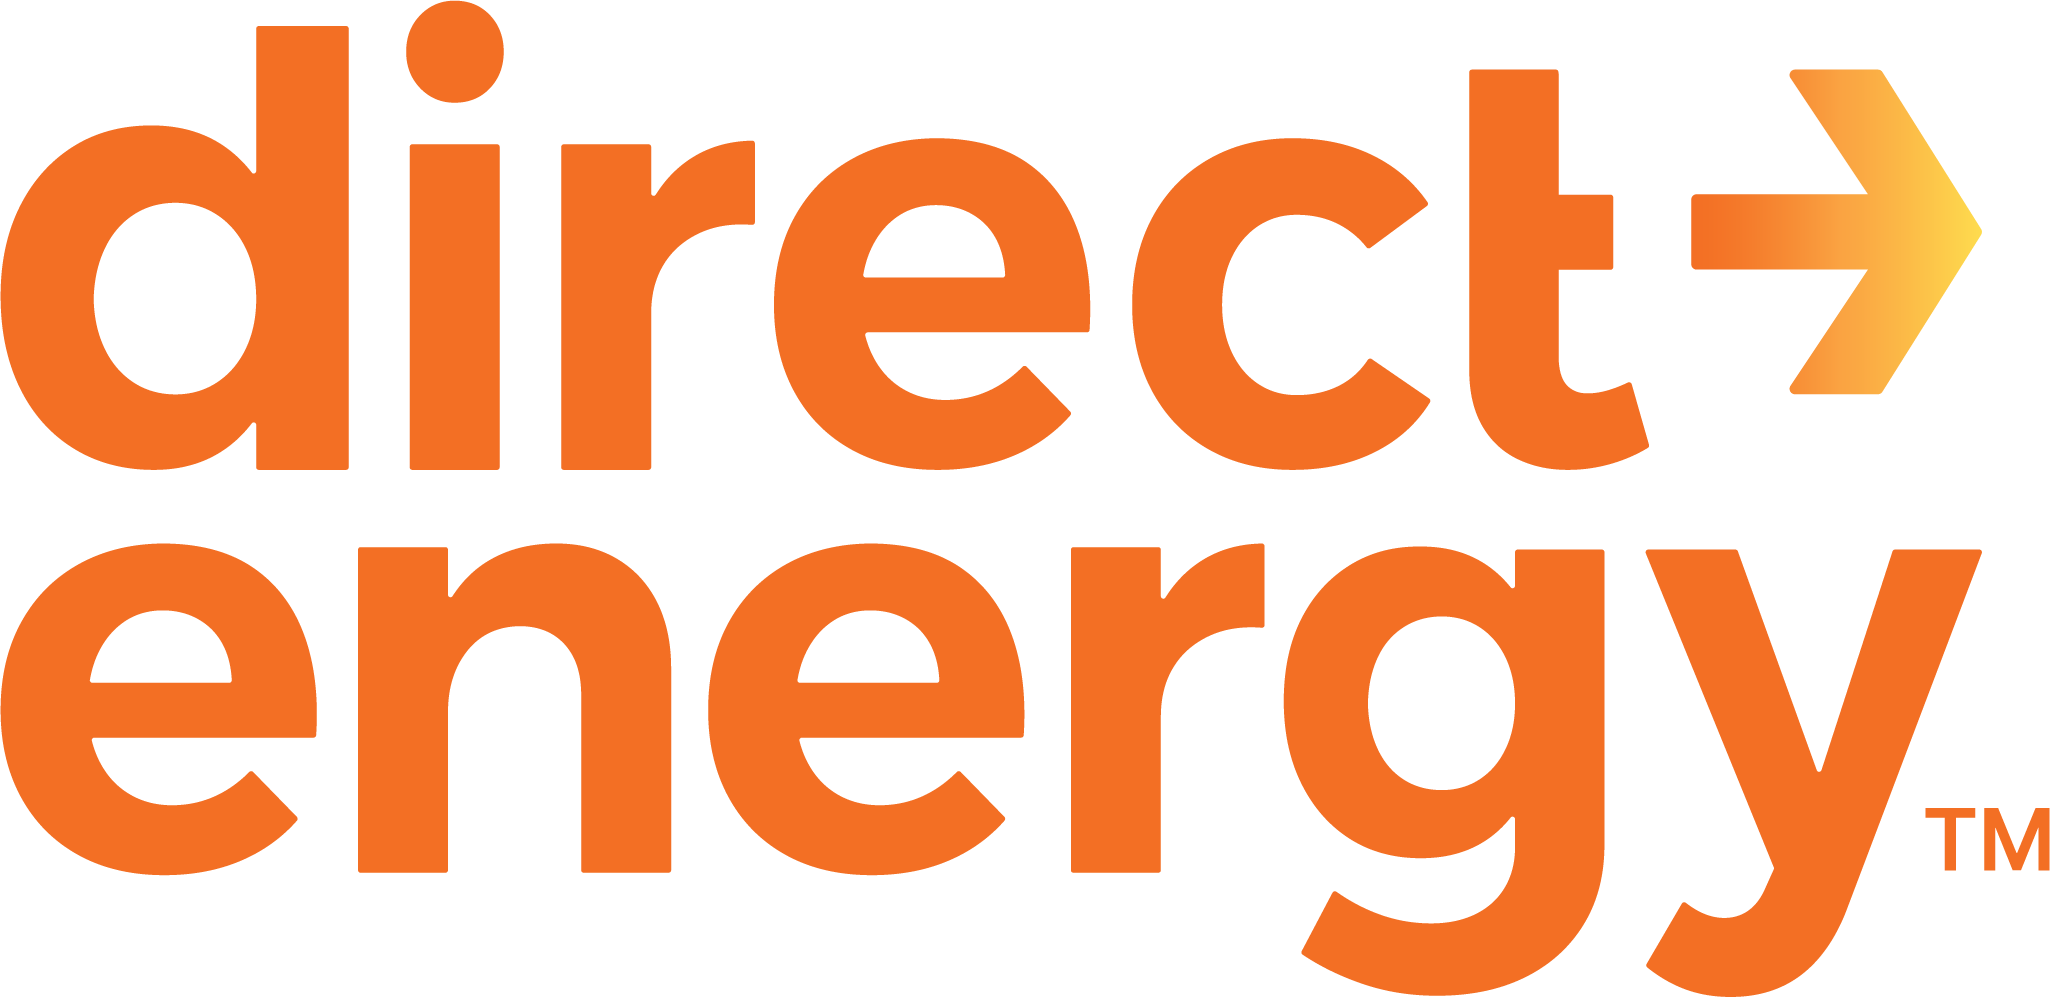 Click to see details for Direct Energy offer. Price .469